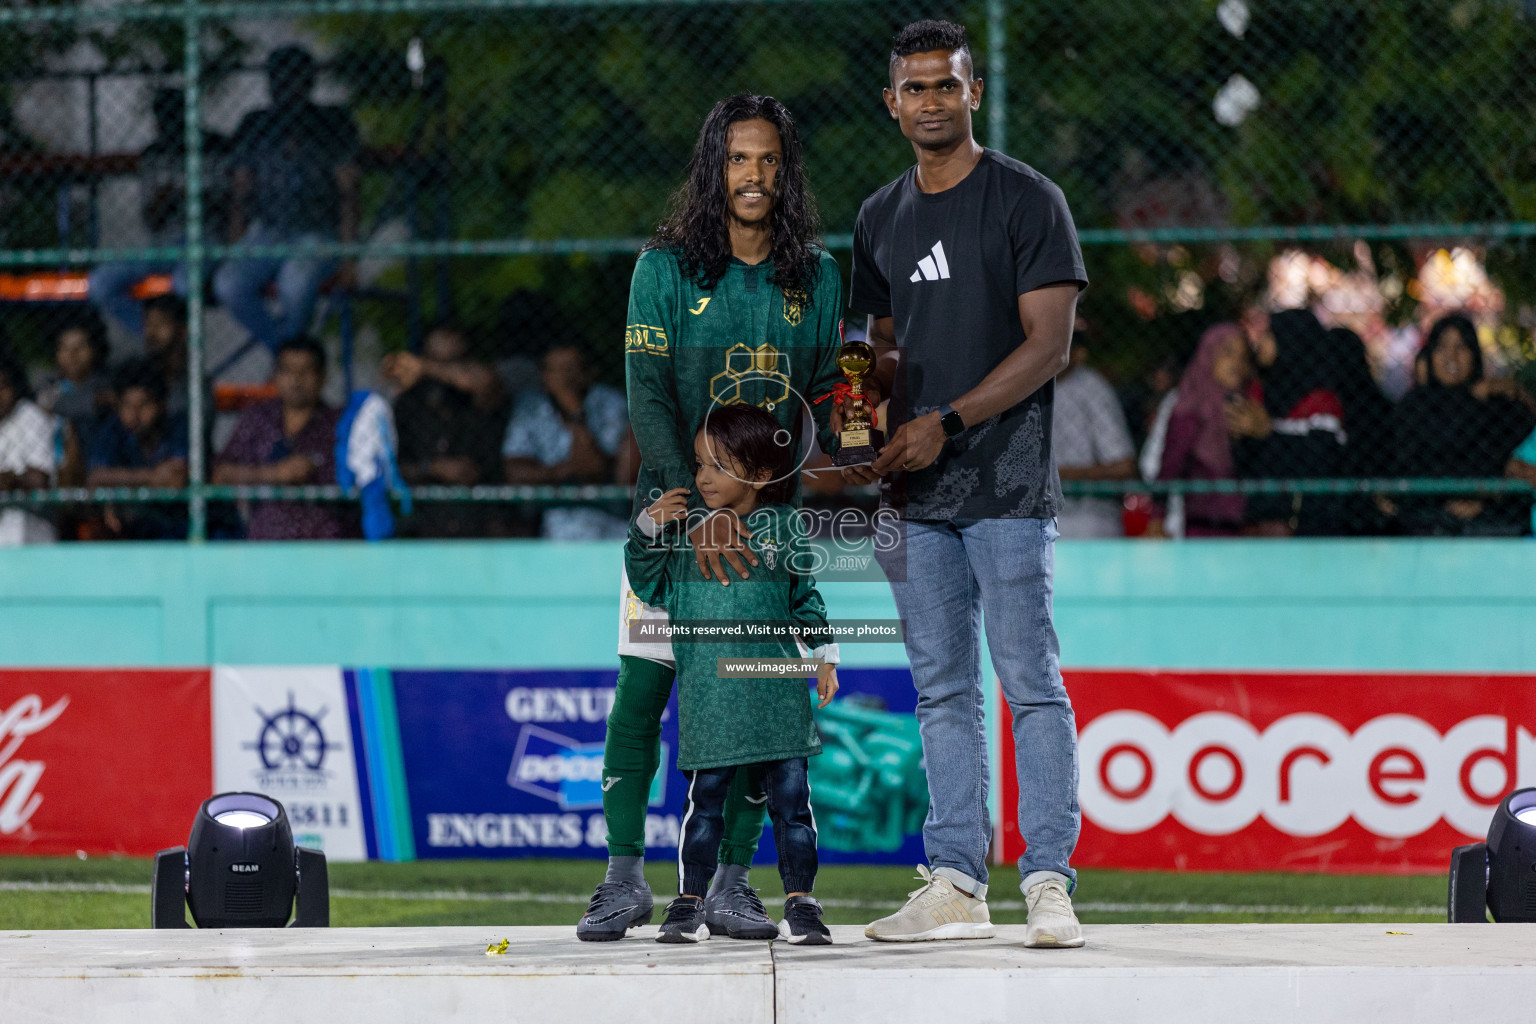 Thimarafushi vs Gaafaru in the finals of Sonee Sports Golden Futsal Challenge 2022 held on 30 March 2022 in Hulhumale, Male', Maldives. Photos by Hassan Simah